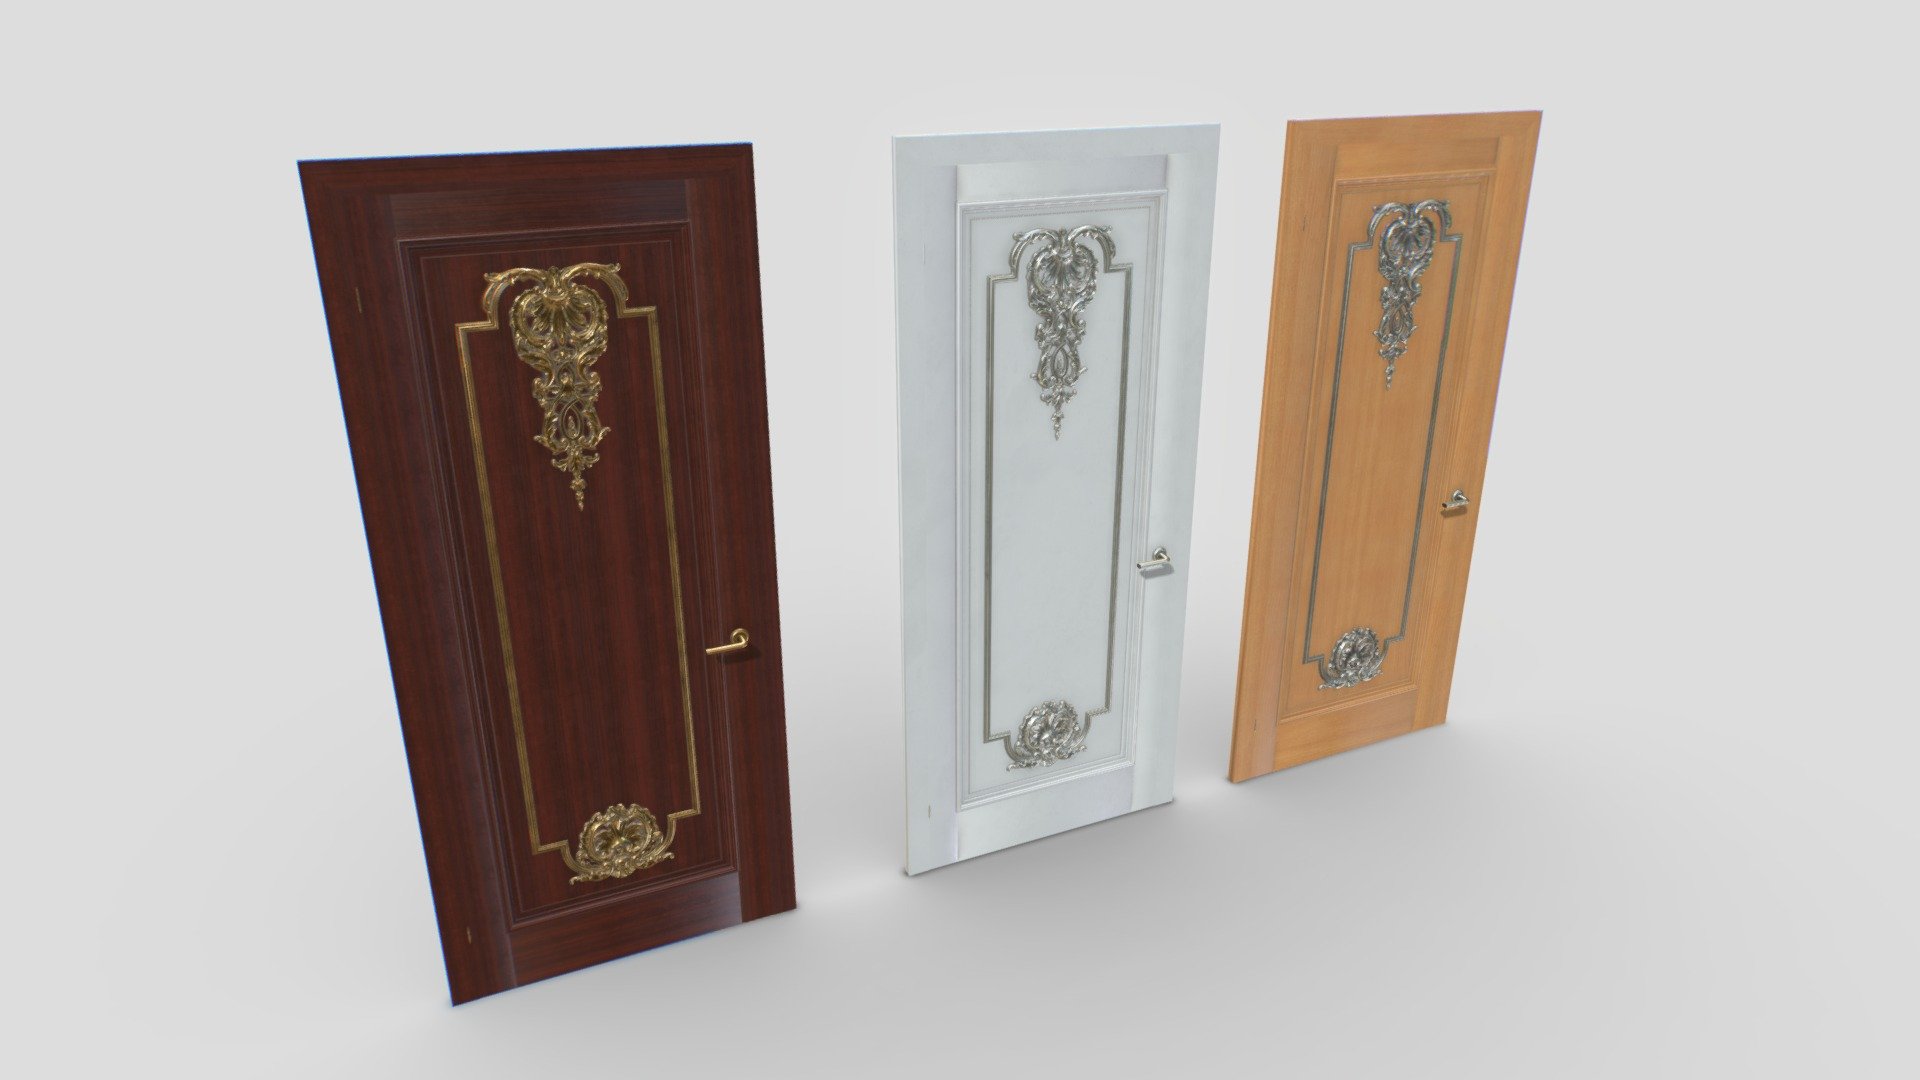 Pack of classic doors. Real scale but scale as you needs. 1 material and 3 sets of textures for a total of 3 different doors.

Each door comes with frame, door and 2 handles in case they need to be animated.

Comes with 4096x PBR textures including Albedo, Normal, Metalness, Roughness and AO. ARM mask texture included (ao, rough, metal) and also unity HDRP mask.

Total tris 120000. 60000 verts.

Suitable for halls, palaces, offices, etc. 3d model